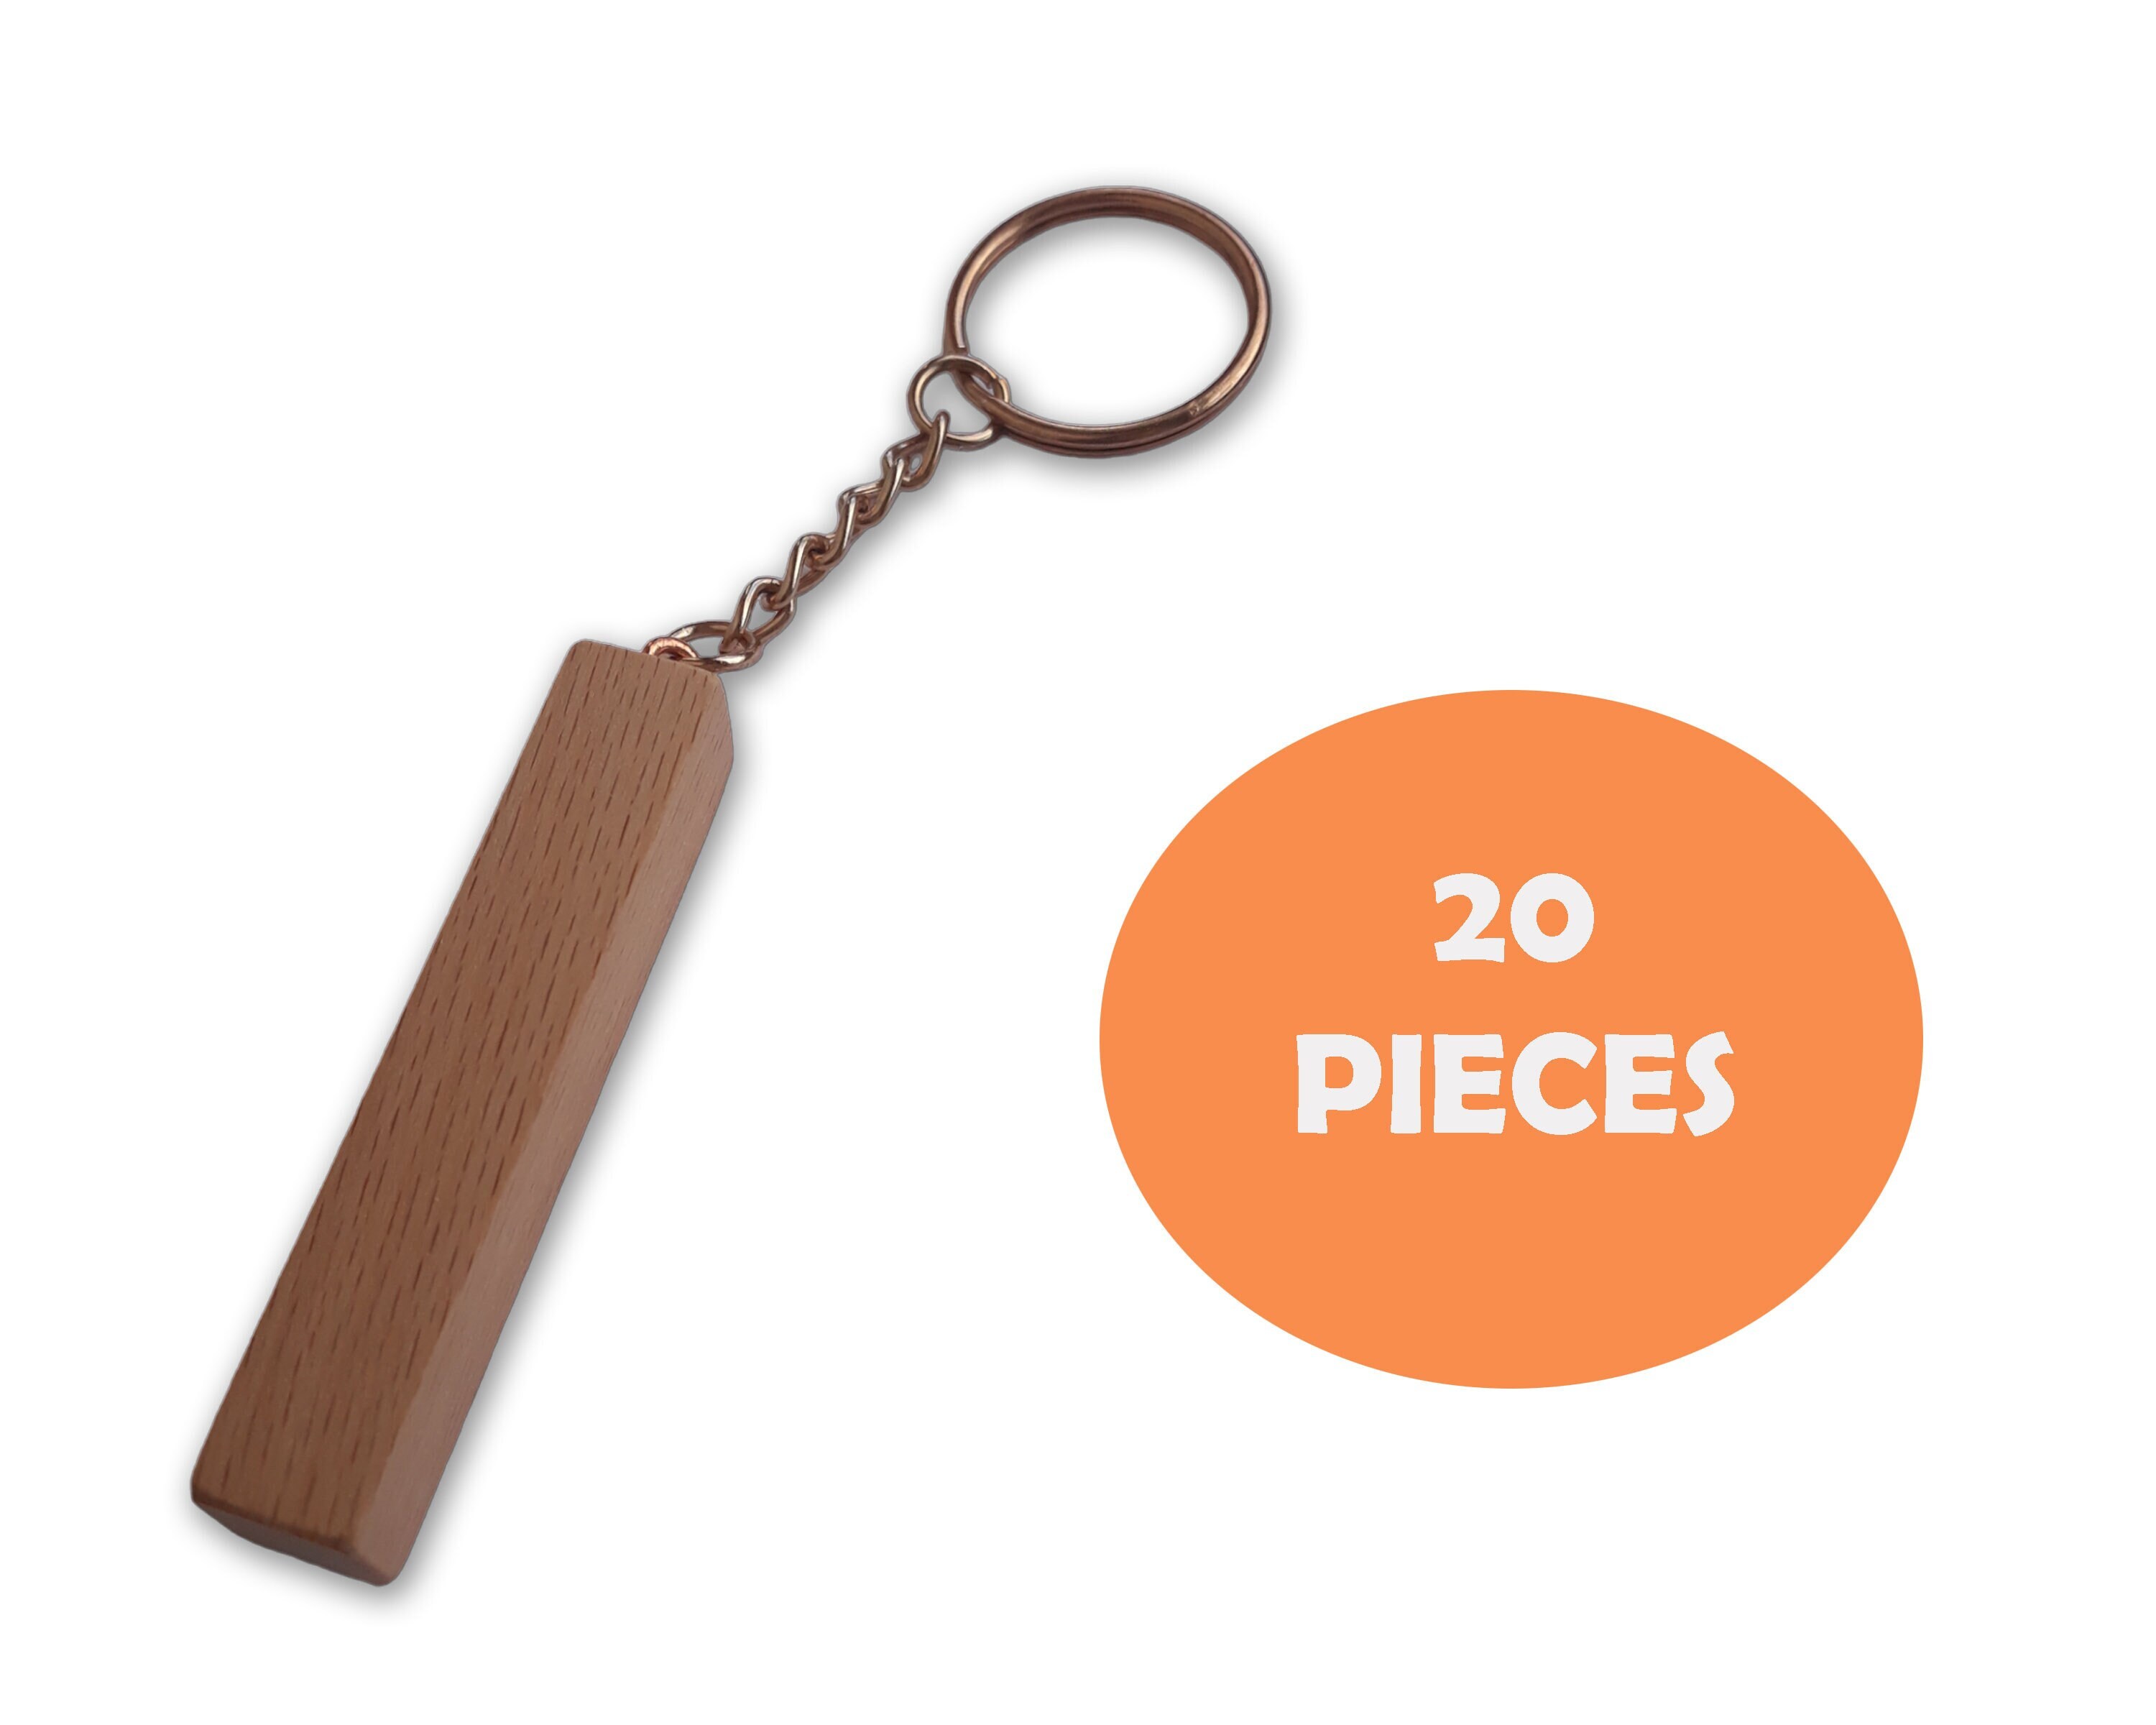 25pcs Leather Wood Keychain Blank Unfinished Wooden Keychains for Laser  Engraving DIY Various Key Tags Wood Crafts Gift